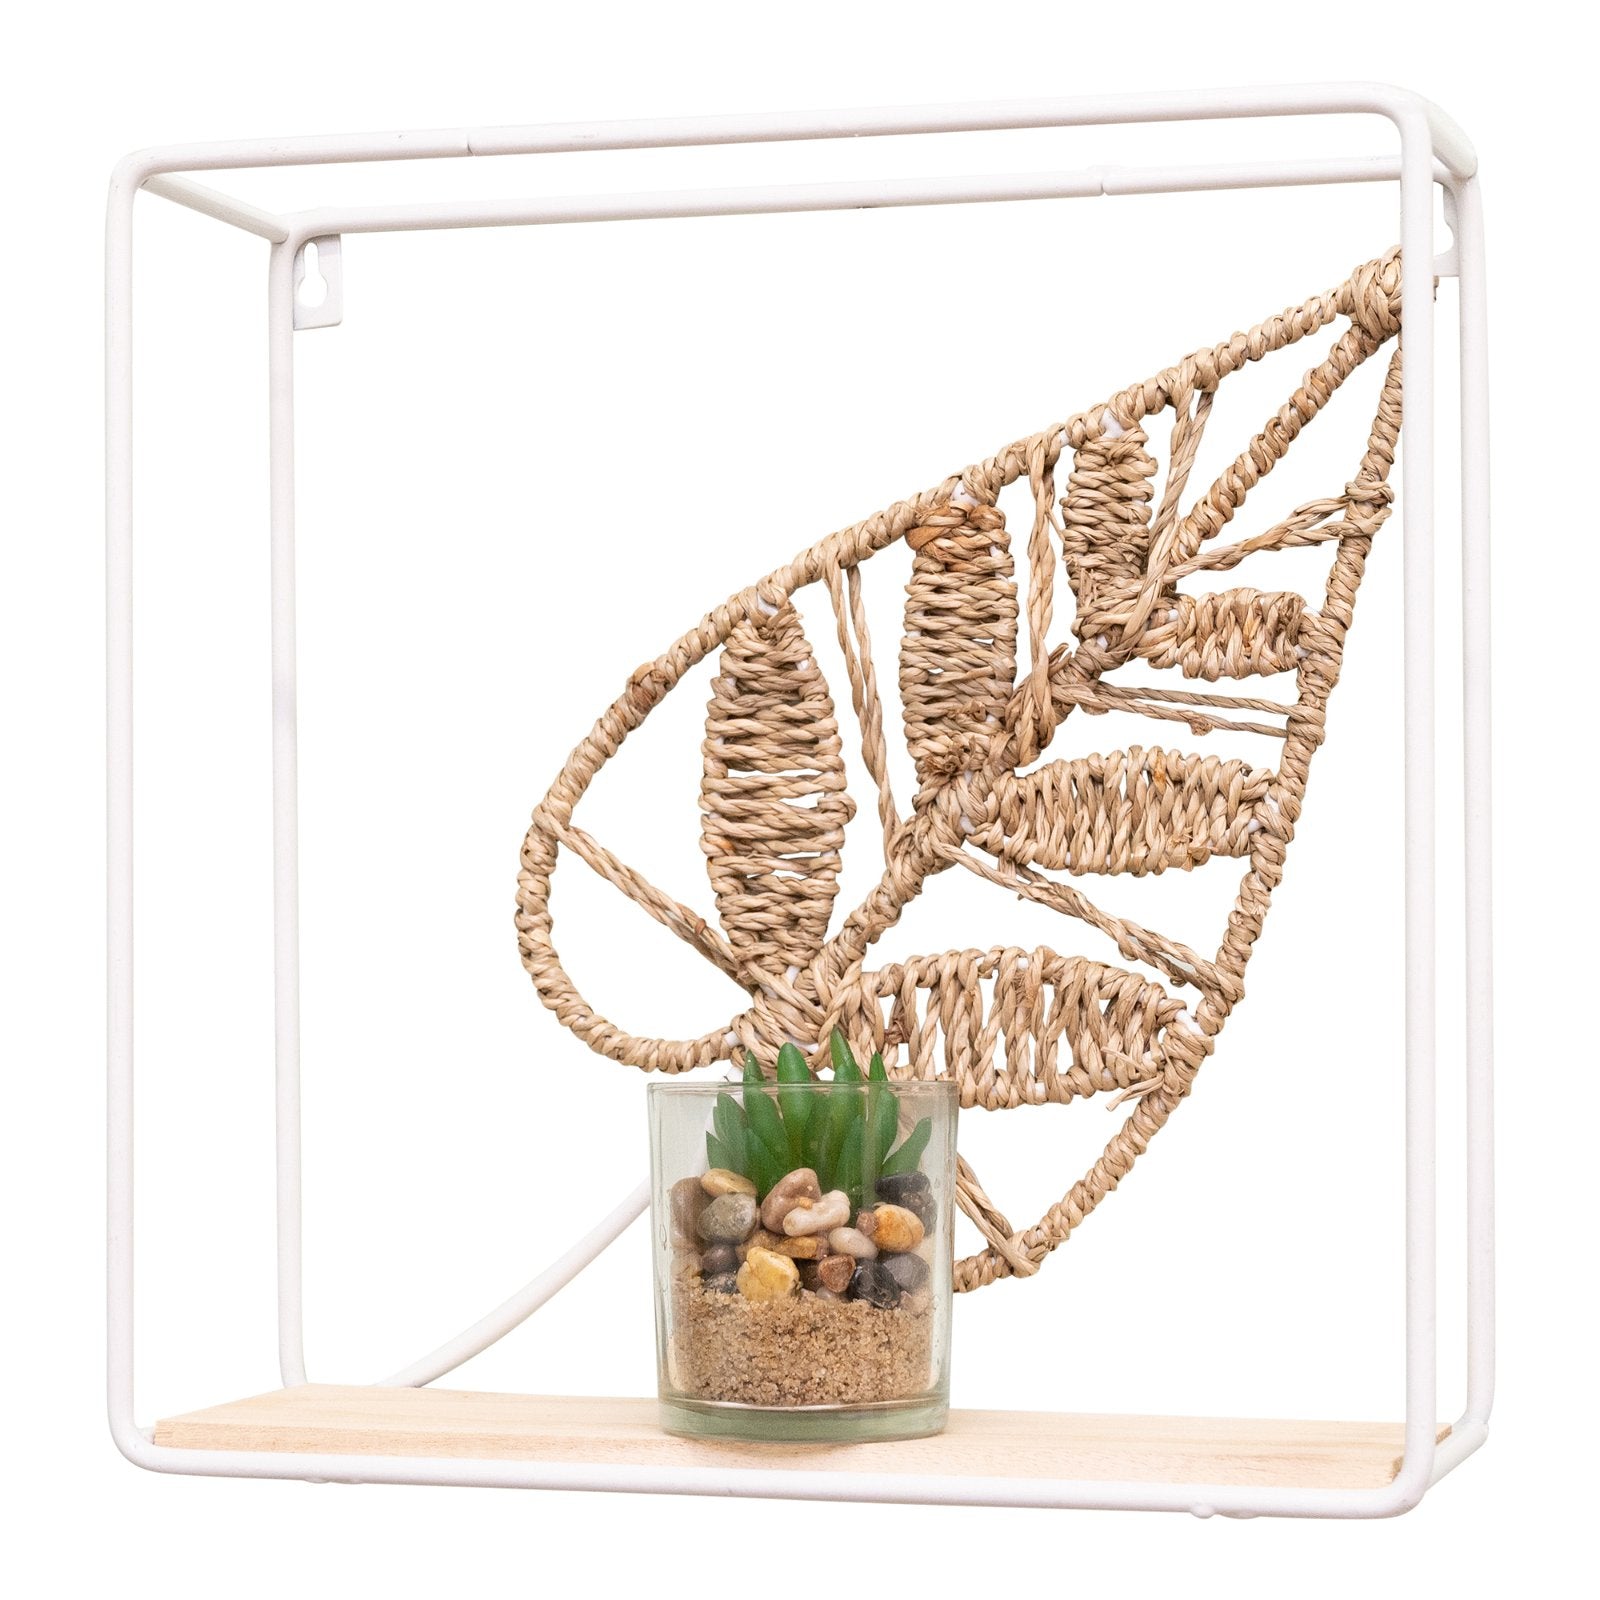 Woven Leaf Design Shelf 30cm Willow and Wine